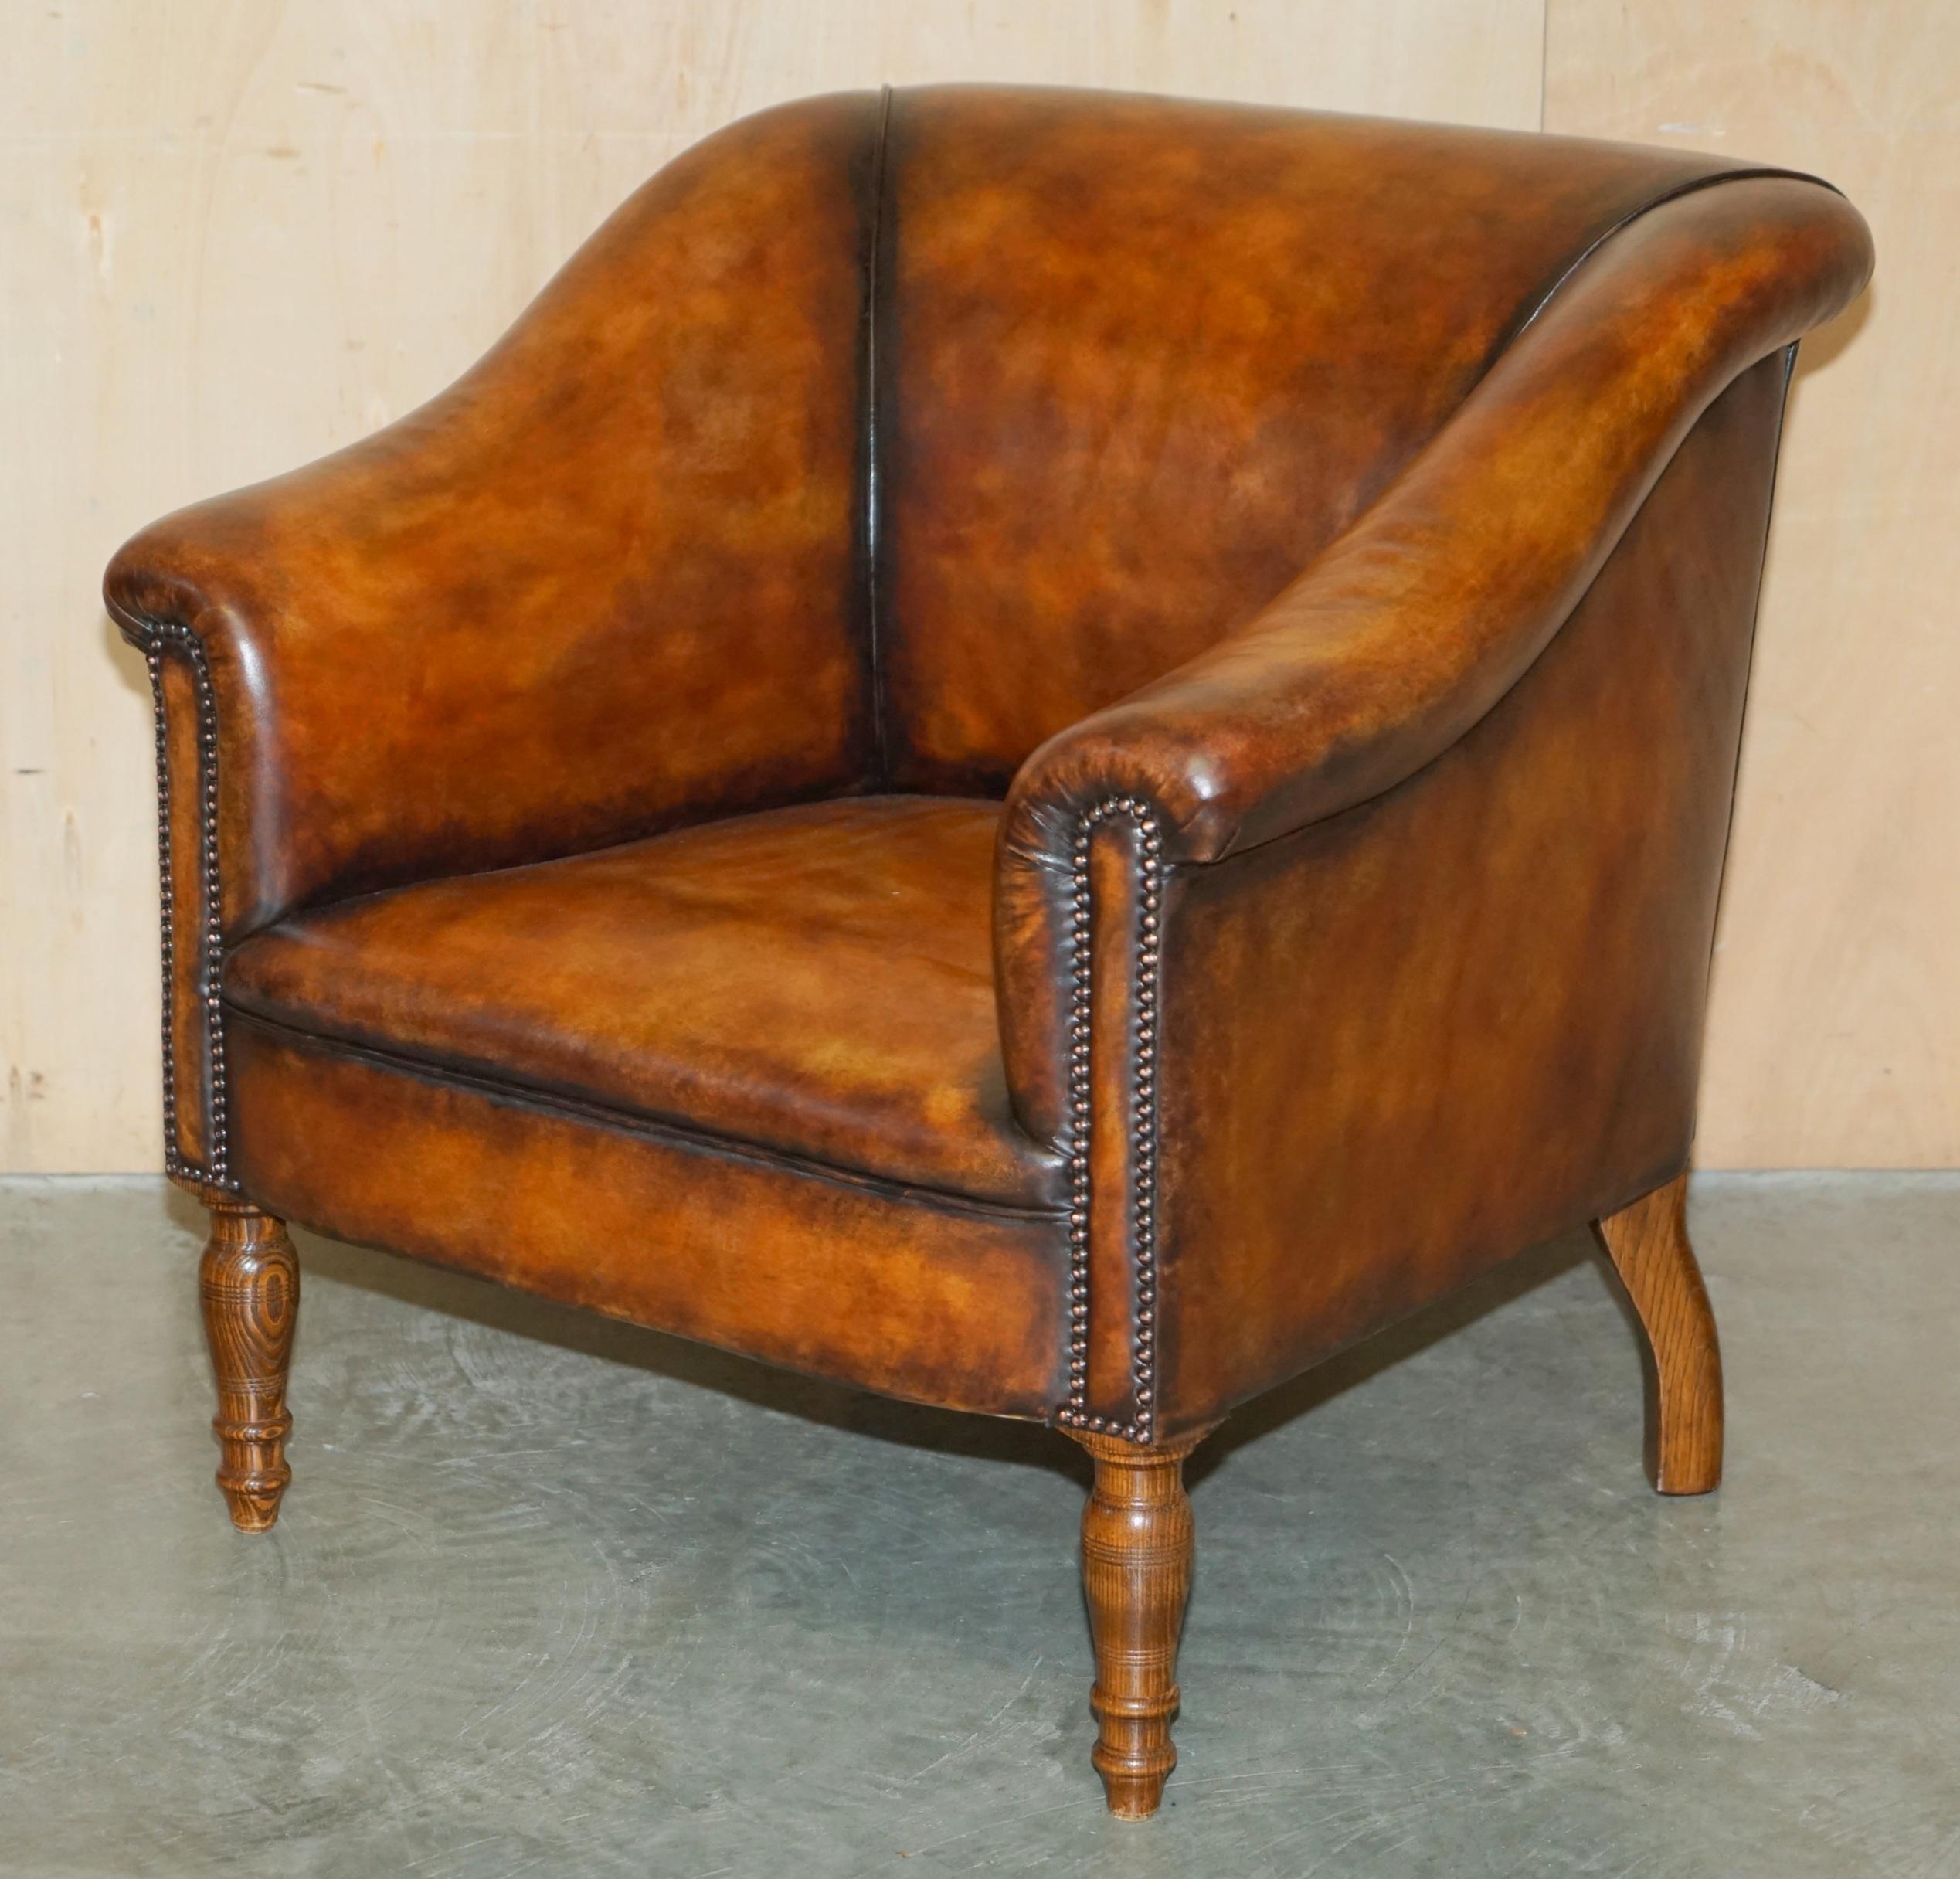 Royal House Antiques

Royal House Antiques is delighted to offer for sale this stunning pair of George Smith cigar brown Somerville occasional Library armchairs with which have been fully restored and hand dyed this unique Cigar brown RRP